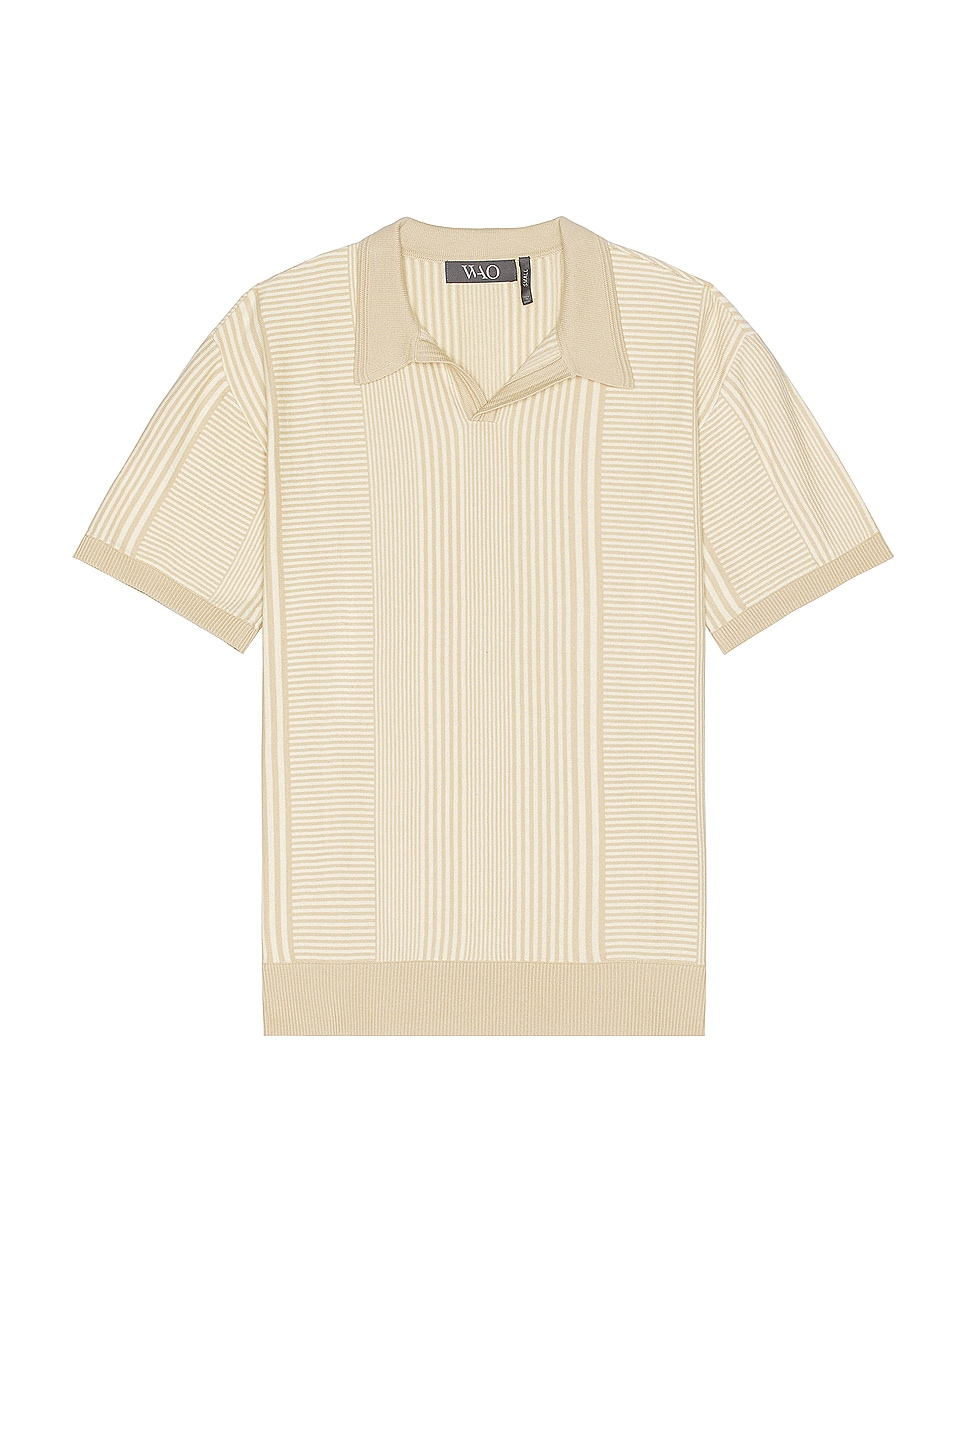 Image 1 of WAO Short Sleeve Pattern Knit Polo in Cream & Natural